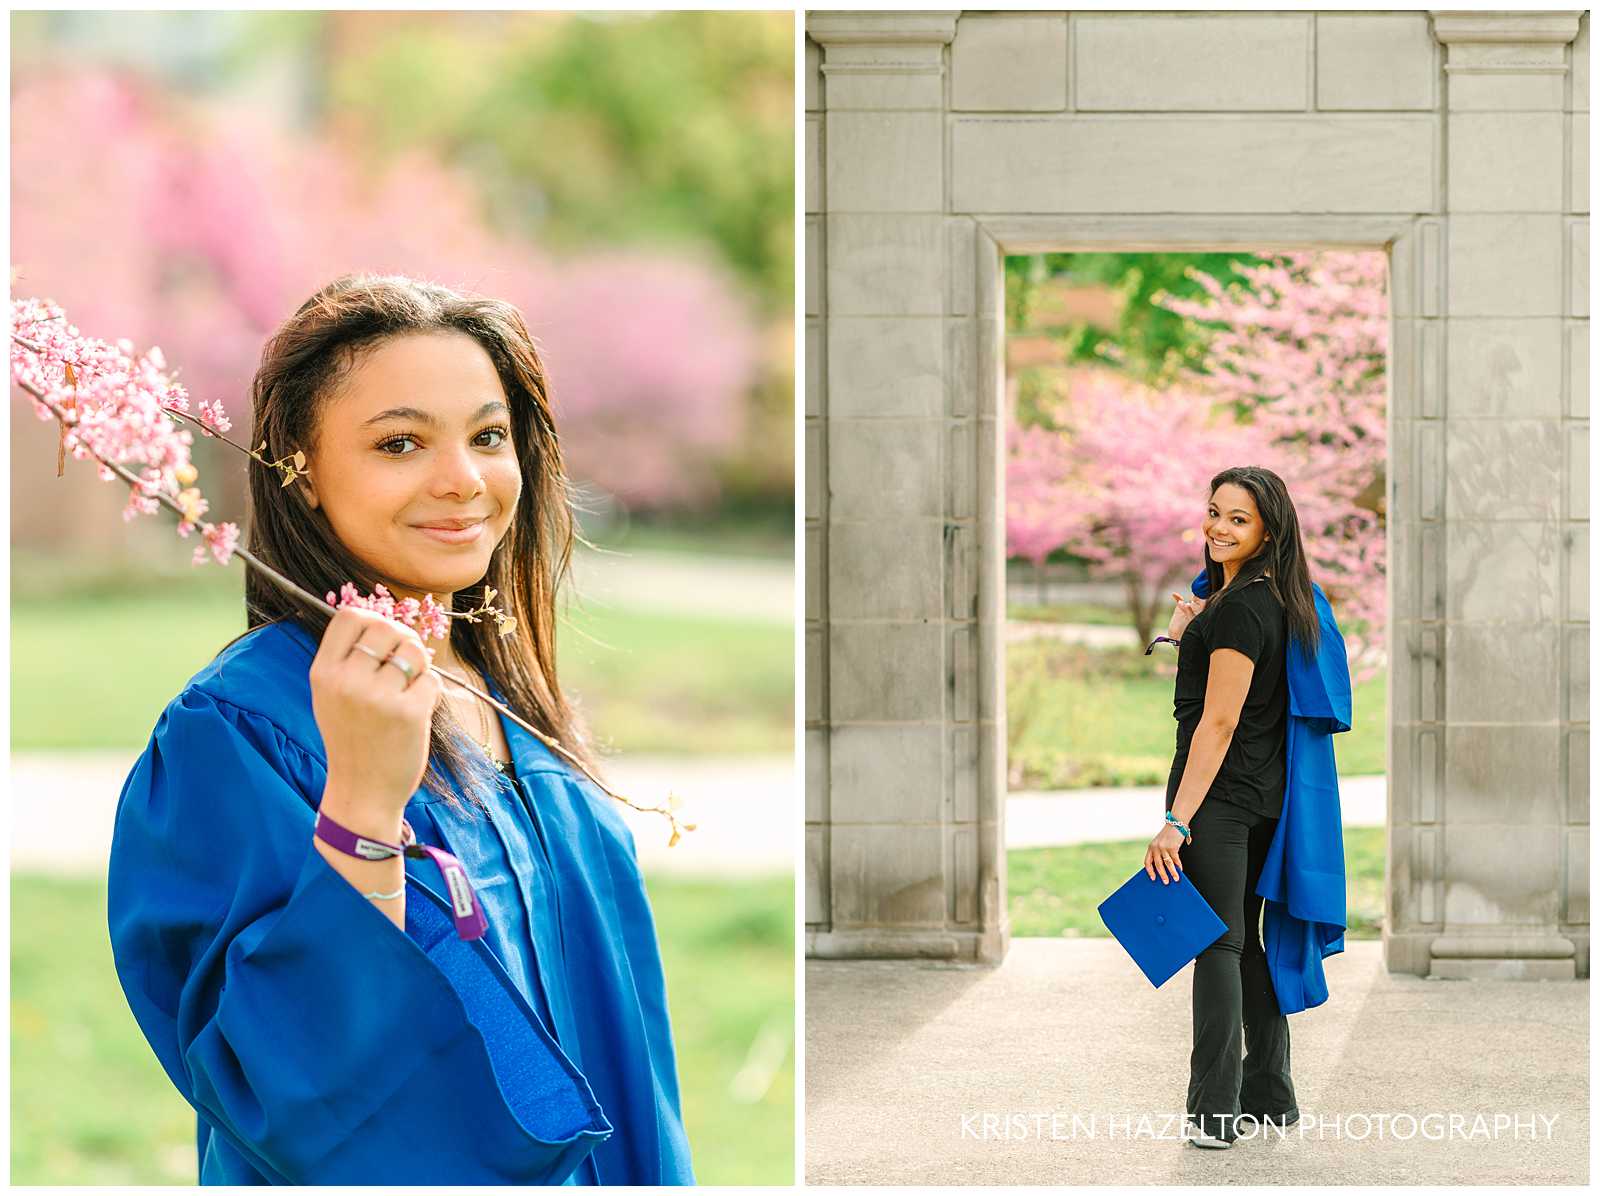 High school senior girl graduate posing with redbuds with her cap and gown.